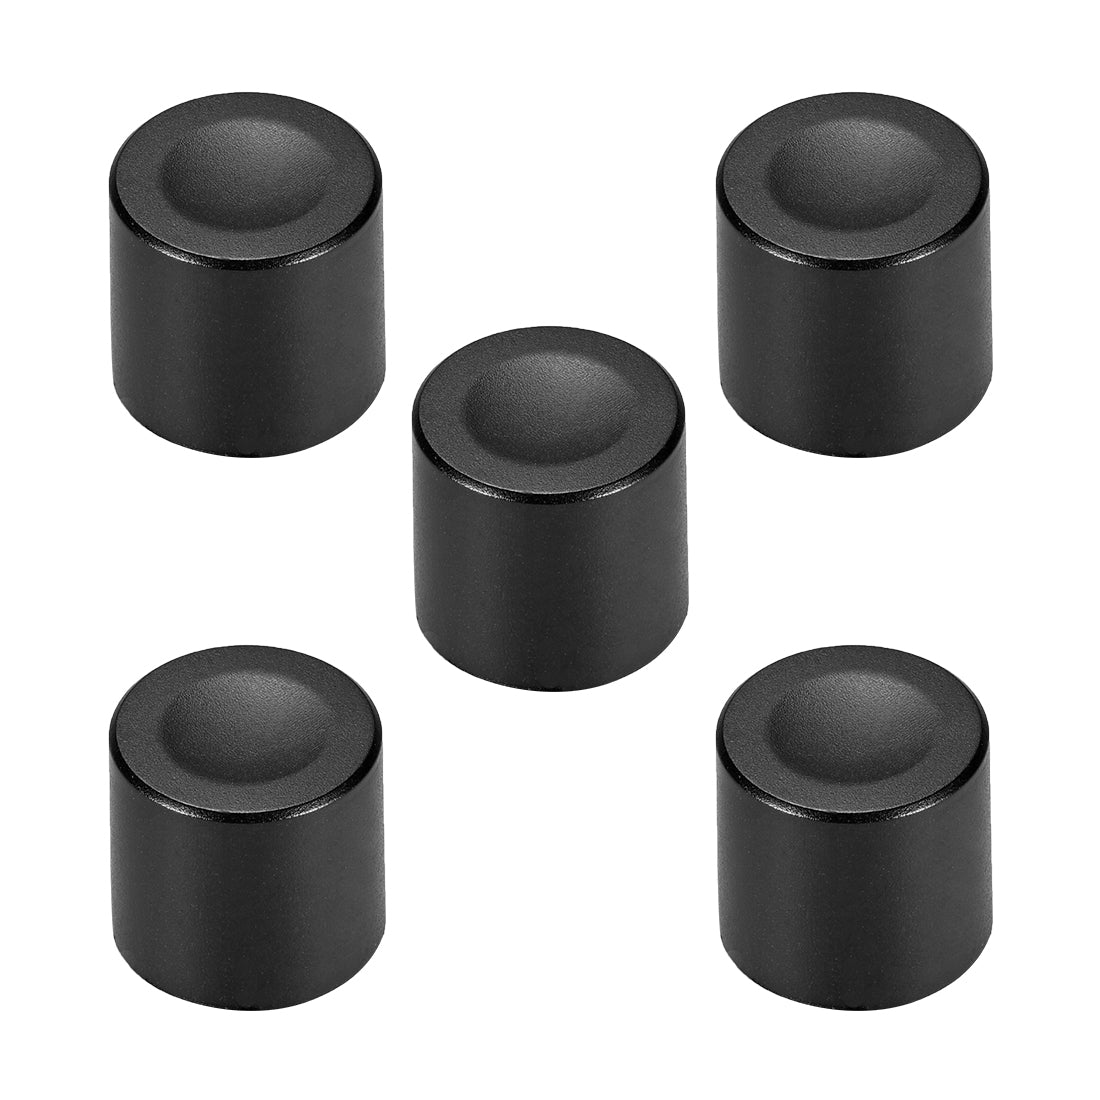 uxcell Uxcell 5pcs, 6mm Potentiometer Control Knobs For Electric Guitar Acrylic Volume Tone Knobs Black